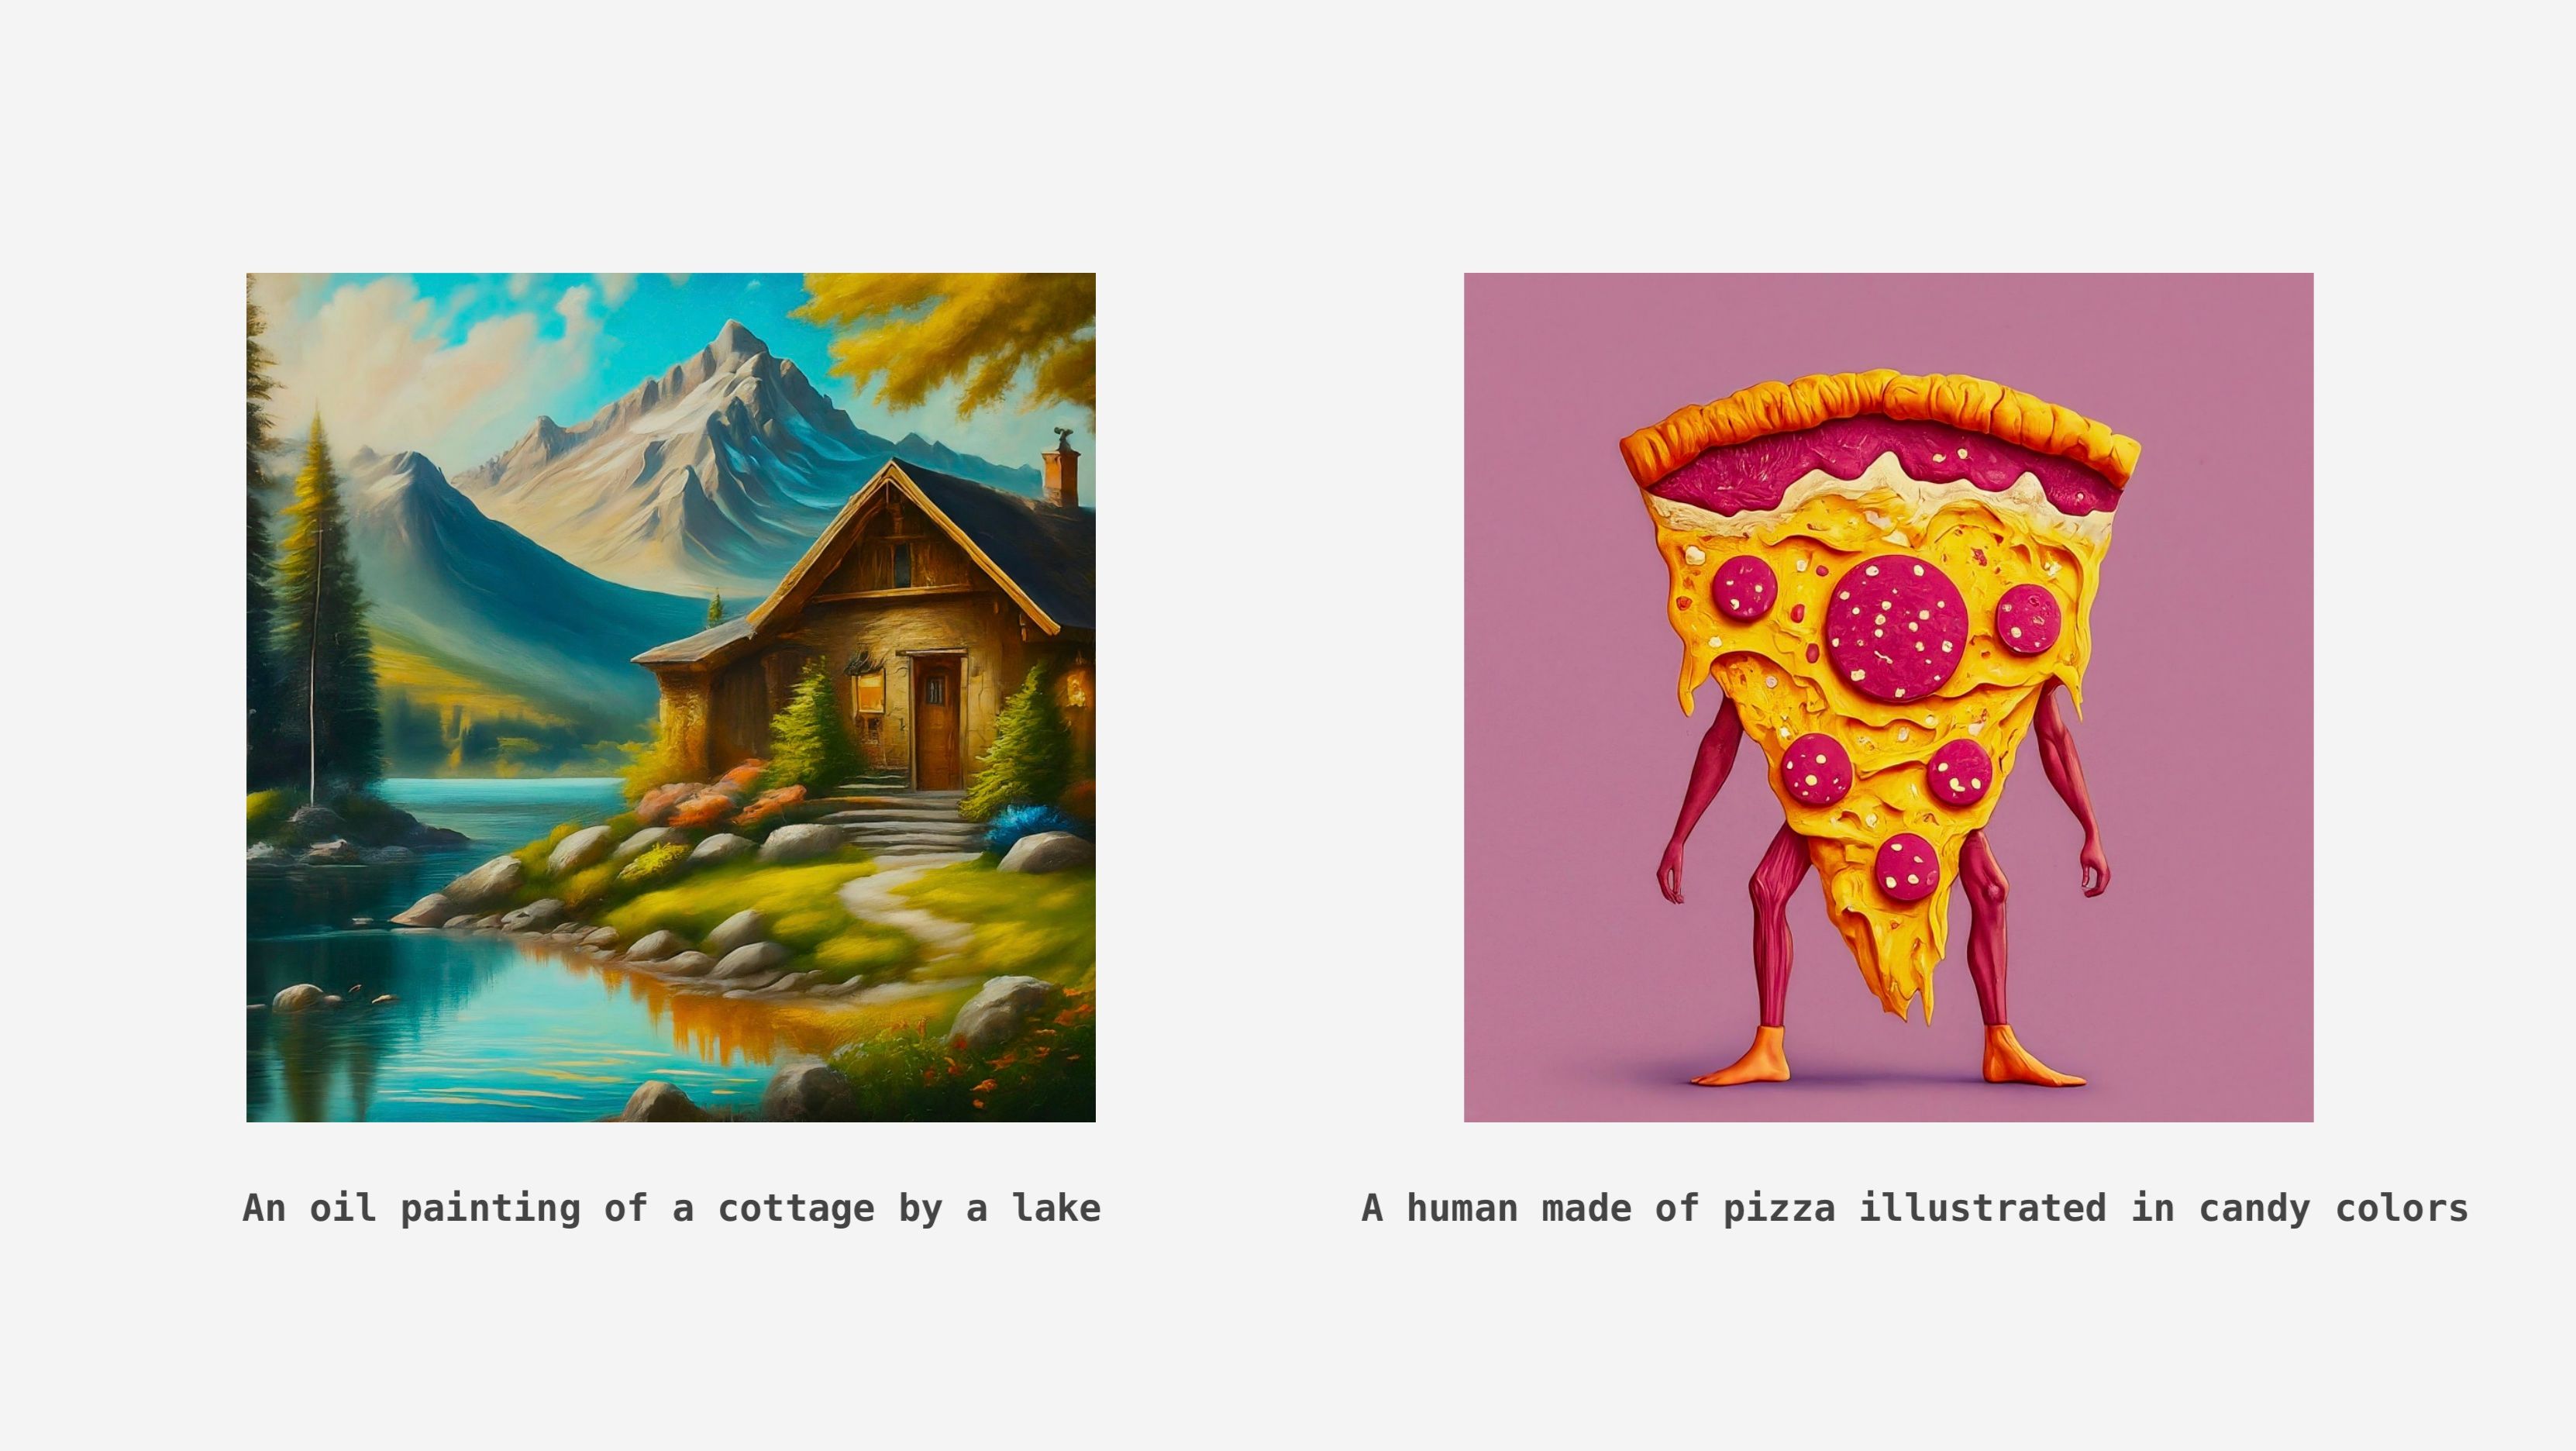 An image of a cottage by a lake next to an image of a pizza with legs and arms